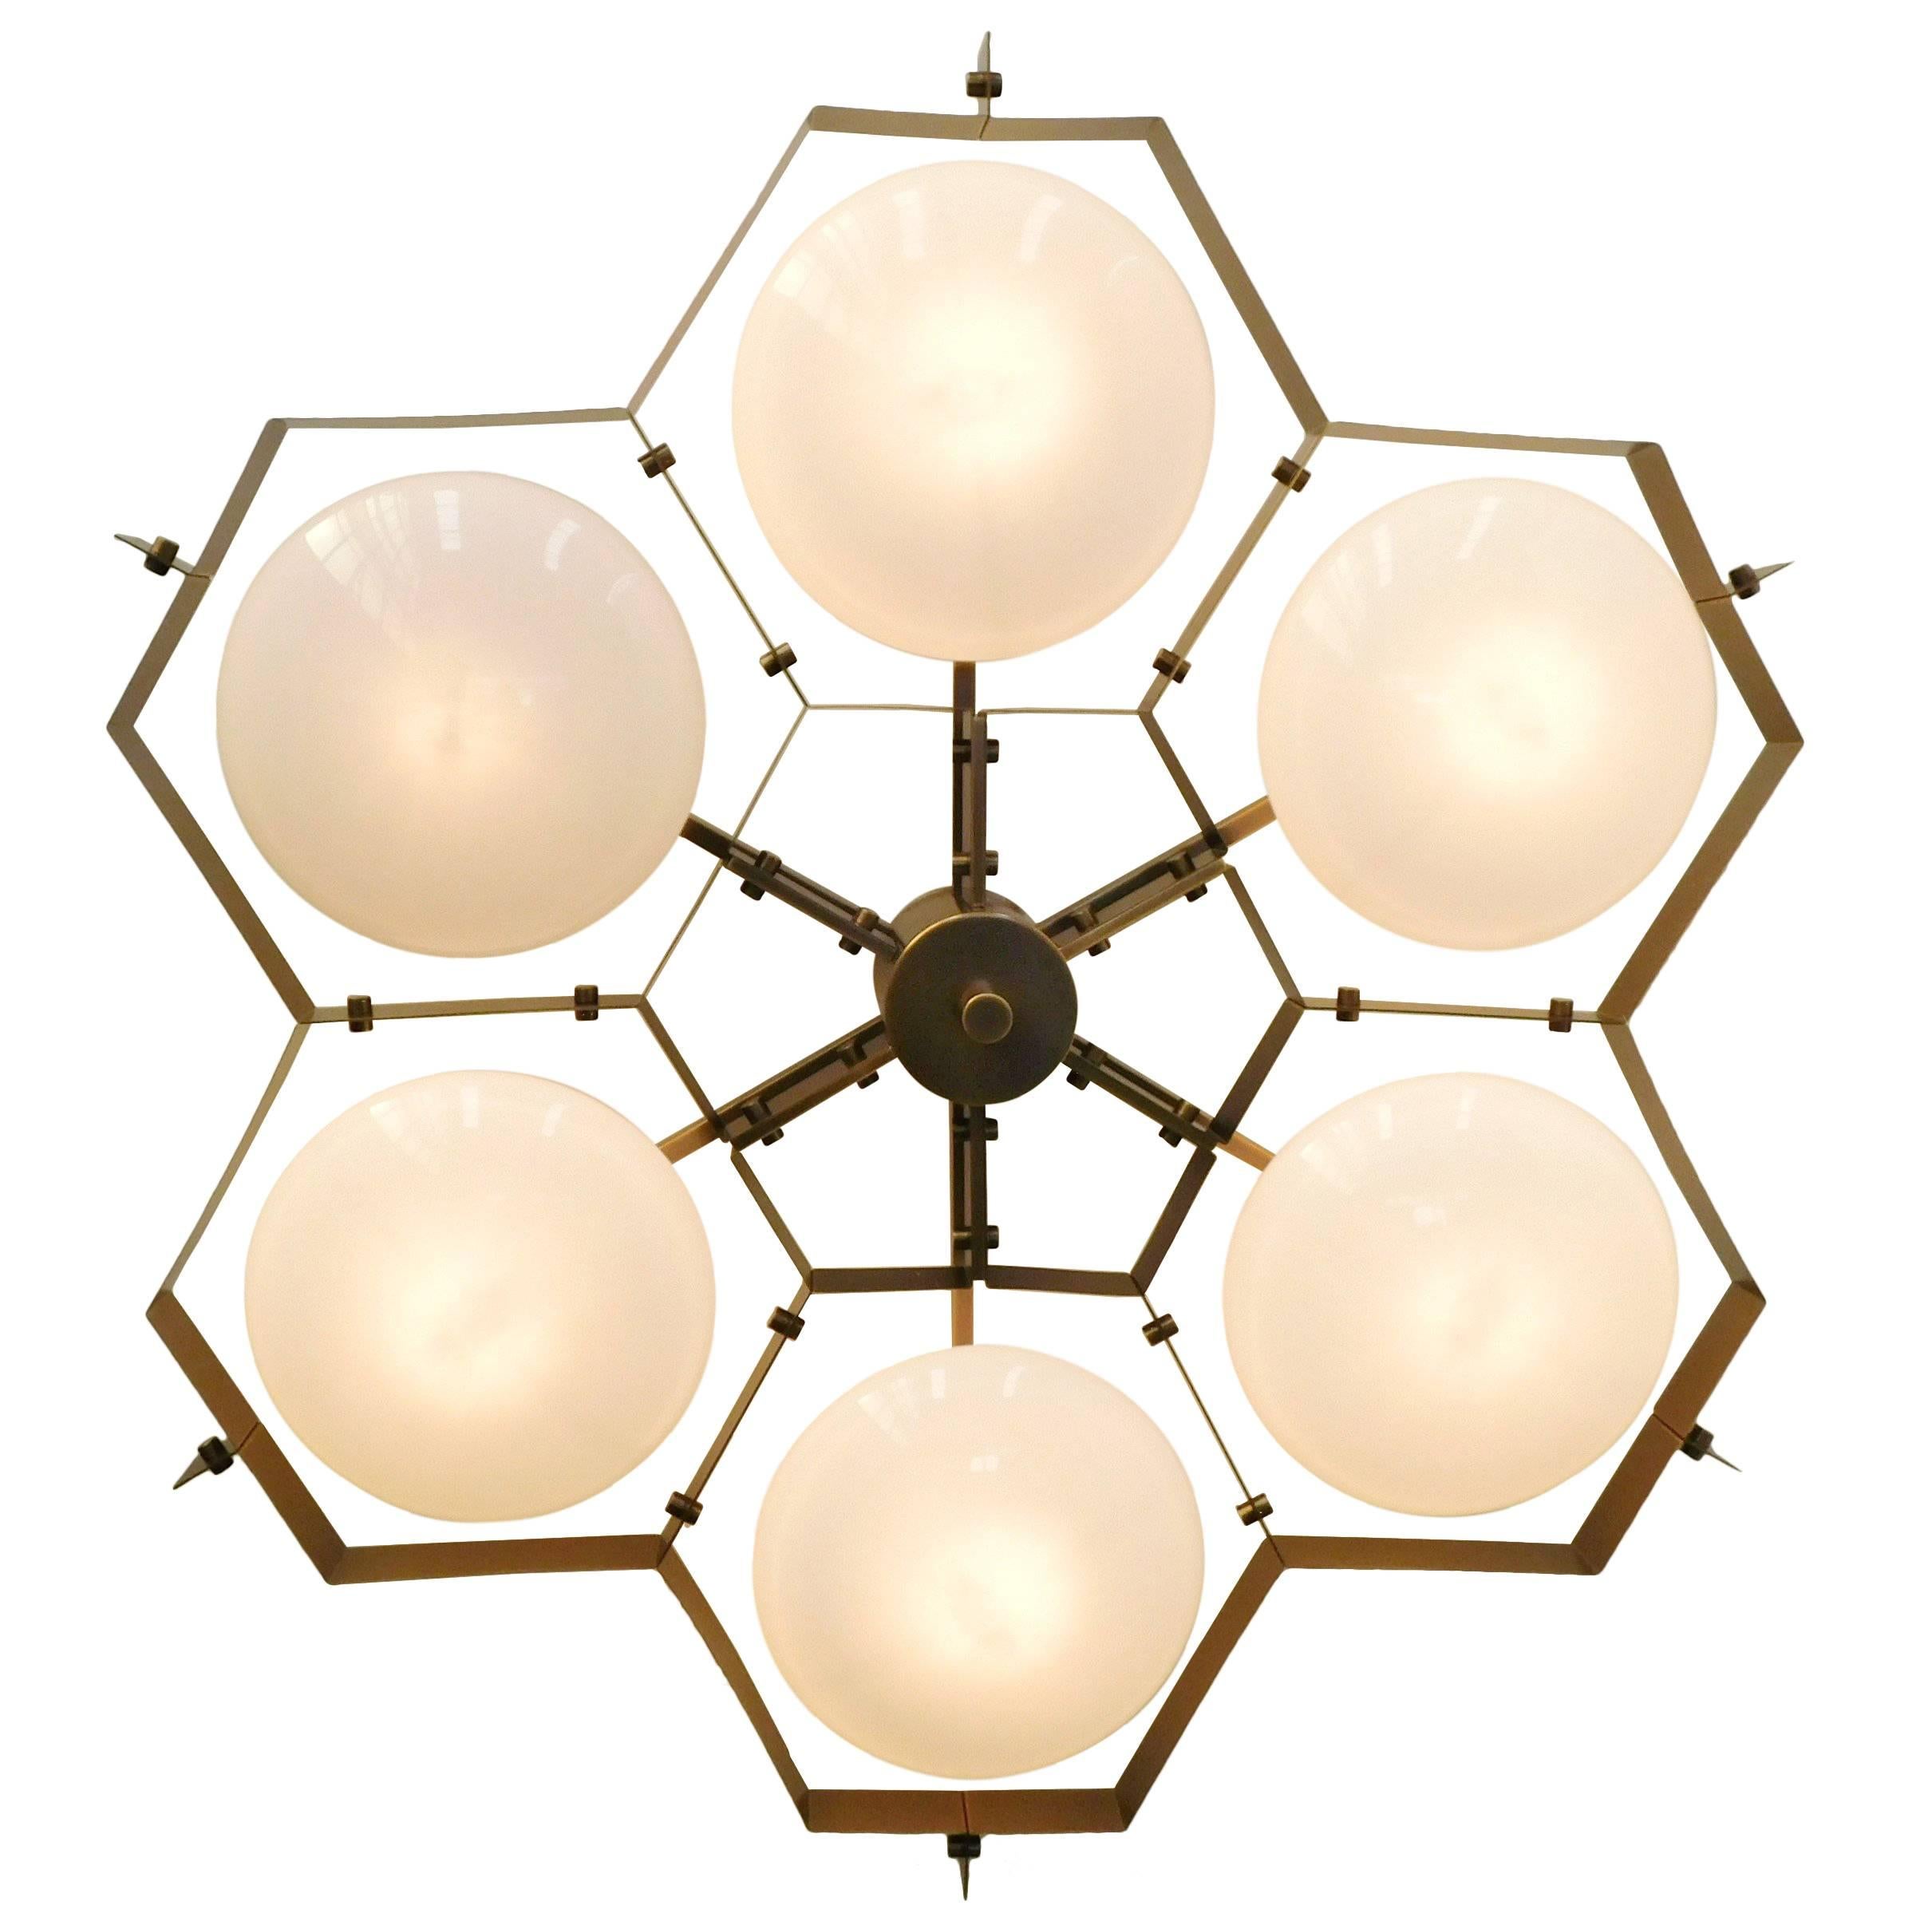 Italian flush mount with Murano glass shades mounted on solid brass frame / Made in Italy
Designed by Fabio Ltd, inspired by Angelo Lelli and Arredoluce styles
6 lights / E12 or E14 / max 40W each
Measures: Diameter 47 inches, height 10 inches
Order